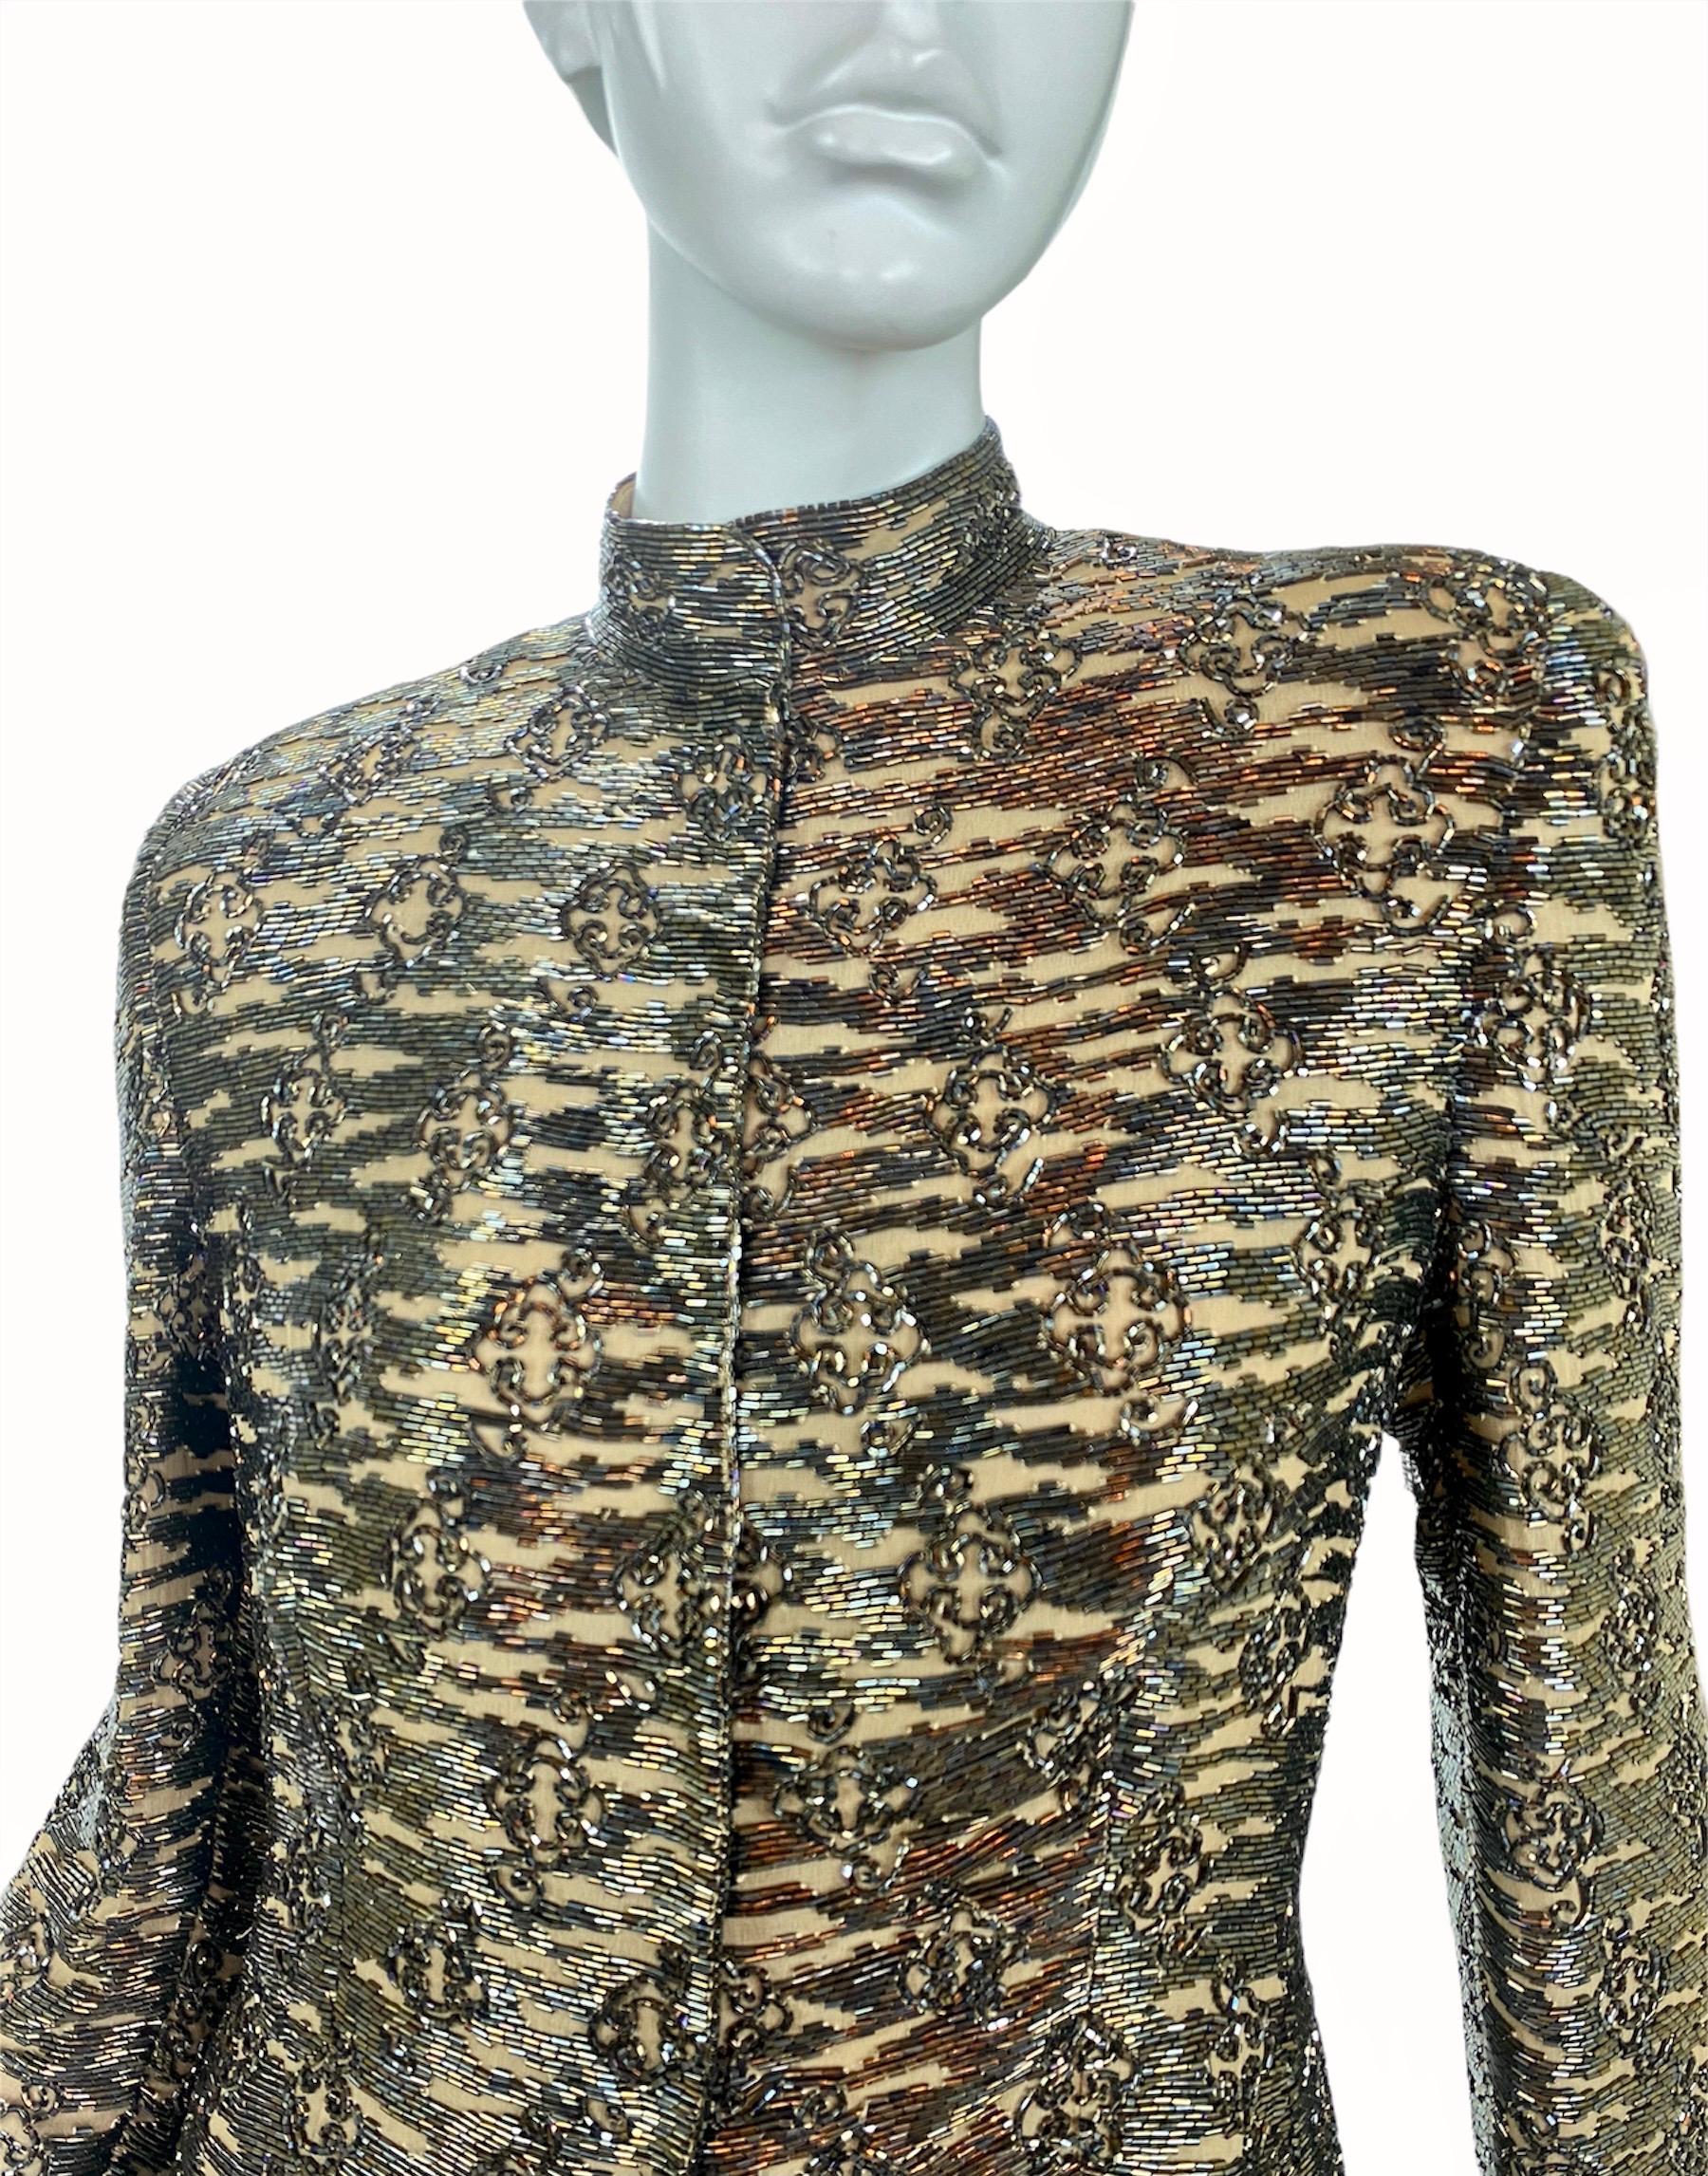 Vintage Giorgio Armani Fully Beaded Evening Blazer Jacket
Size Tag Missing ( approx. size 44 - US 8 ) - Please Check Measurements
Very Classy and Exquisite, Fully Beaded Over the Nude Background. Fully Lined in Beige Silk, Padded Shoulders, Front